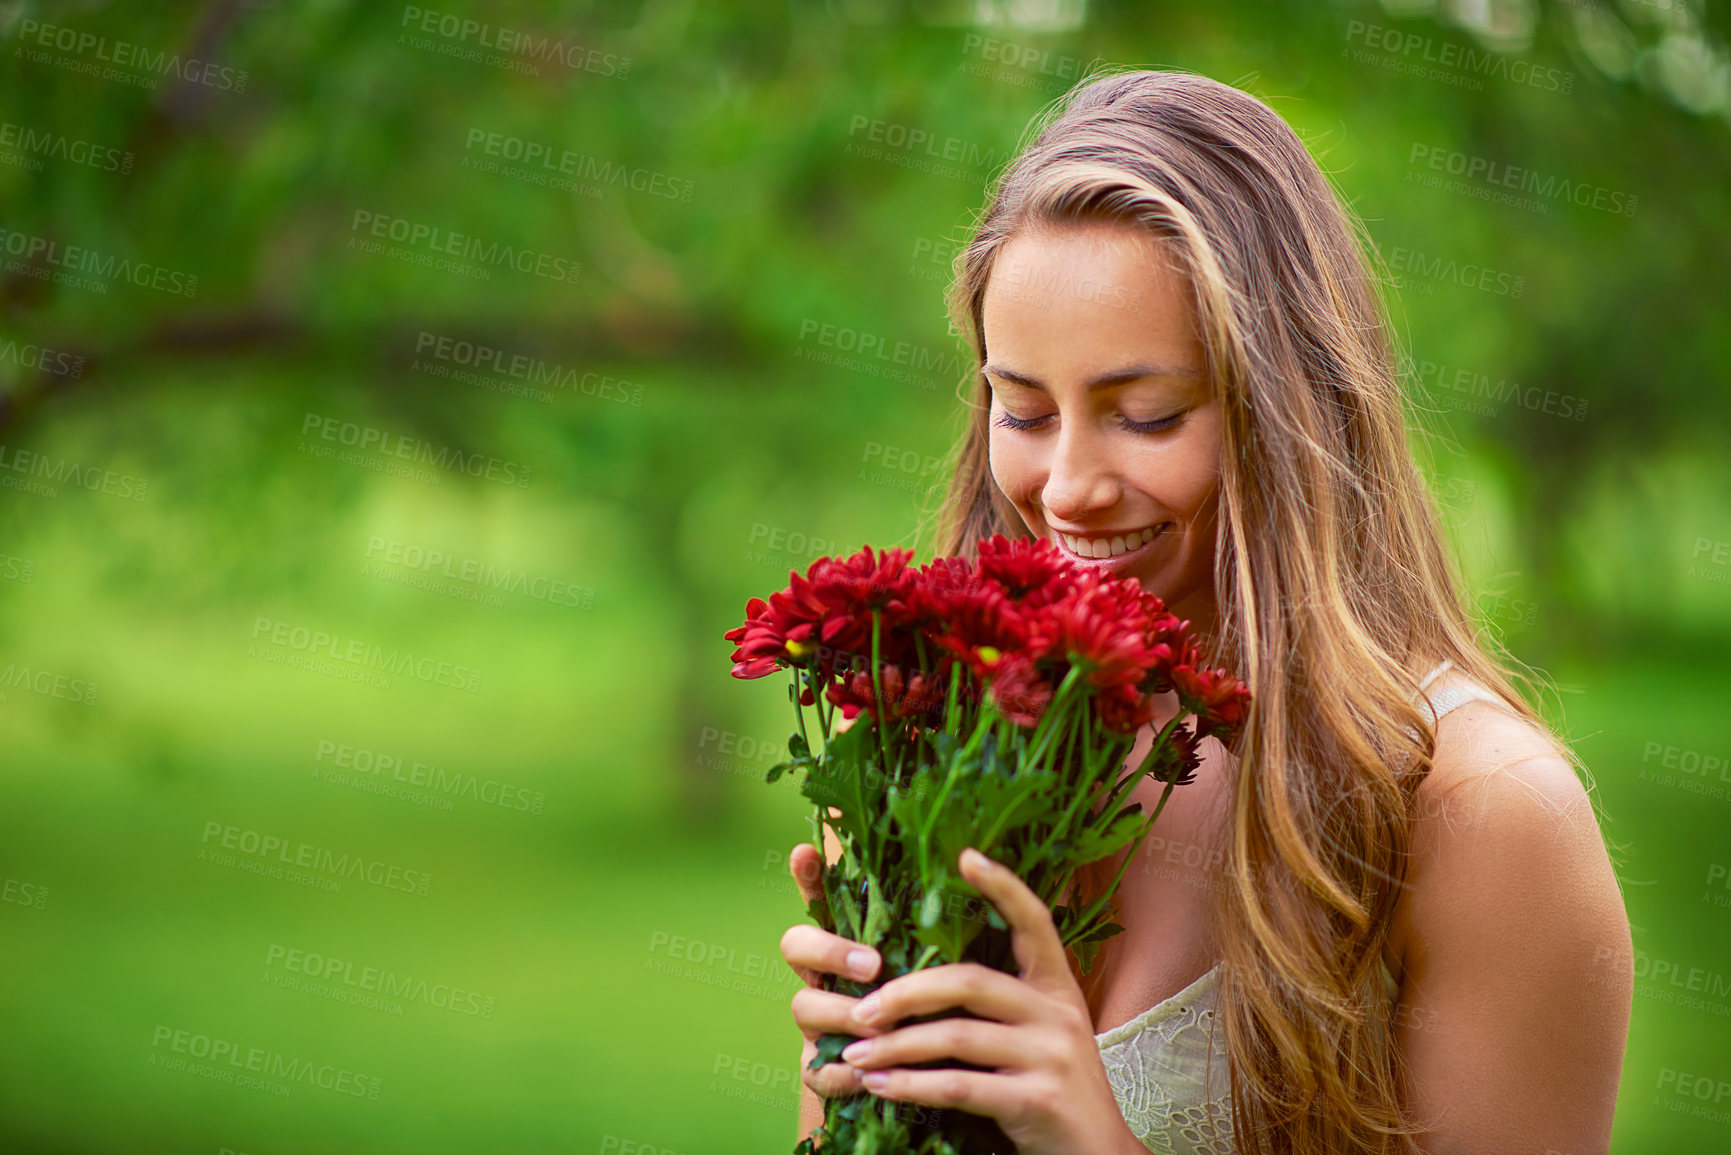 Buy stock photo Shot of a young woman holding a bunch of red flowers outside